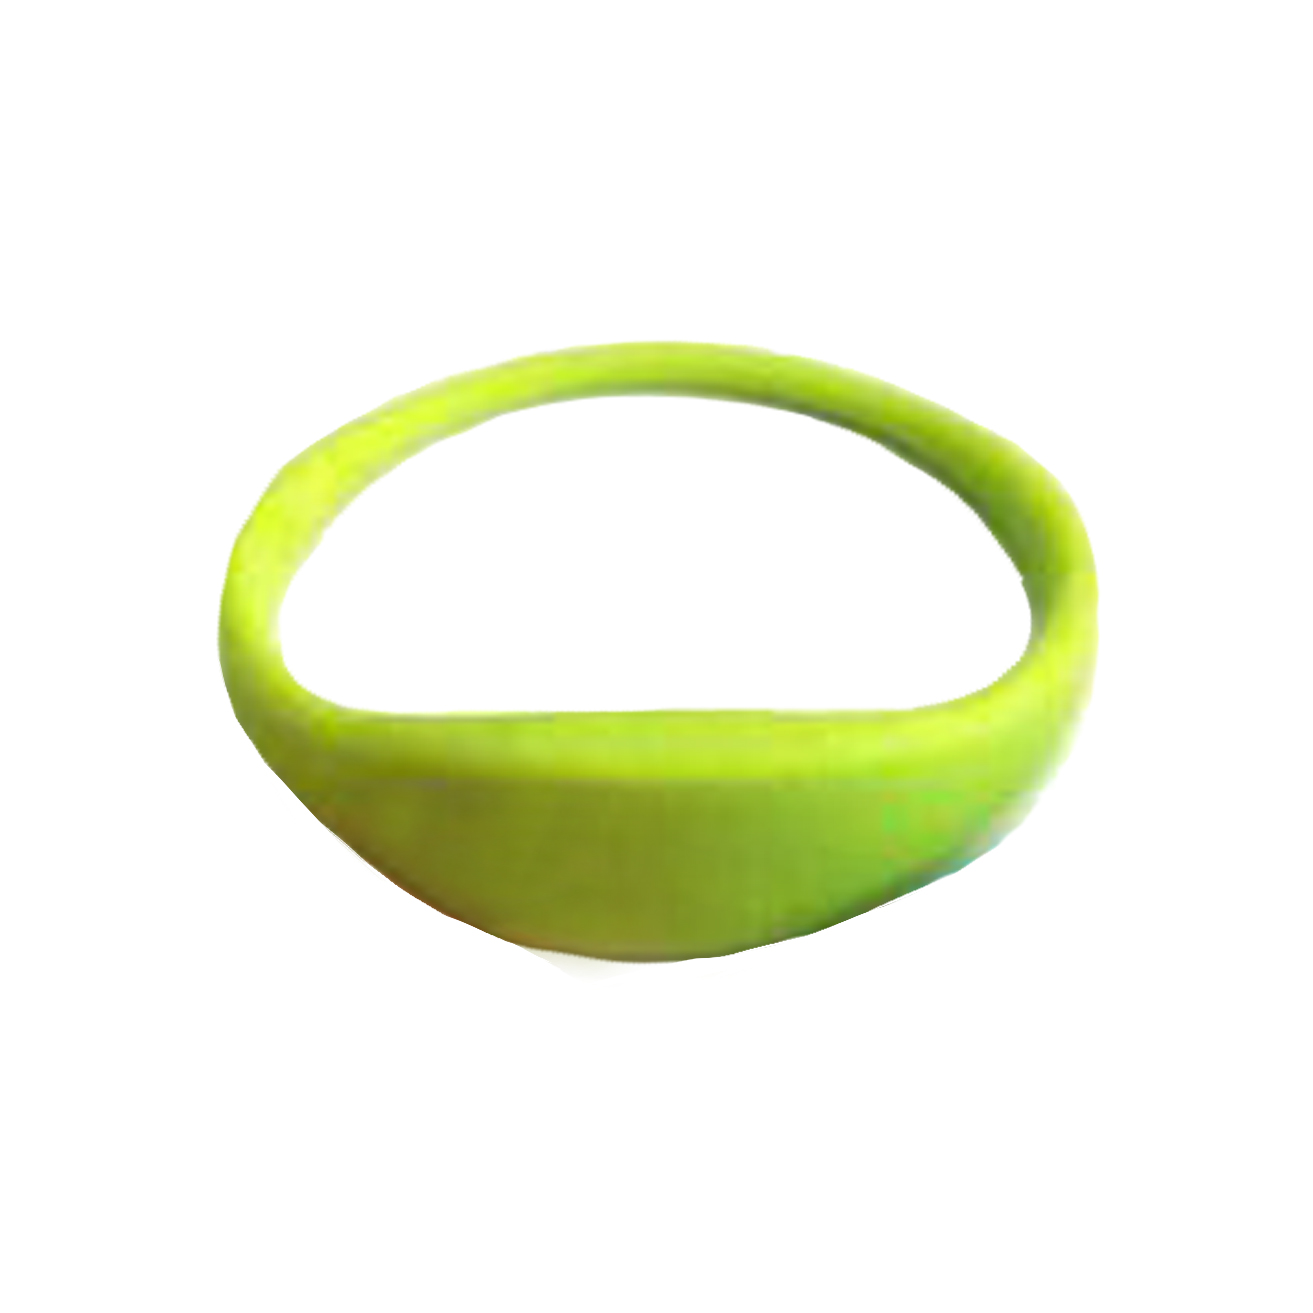 8852 SERIES SLIM OVAL SHAPE PROX WRISTBAND SILICONE YELLOW HID (125KHZ) 65MM DIAMETER